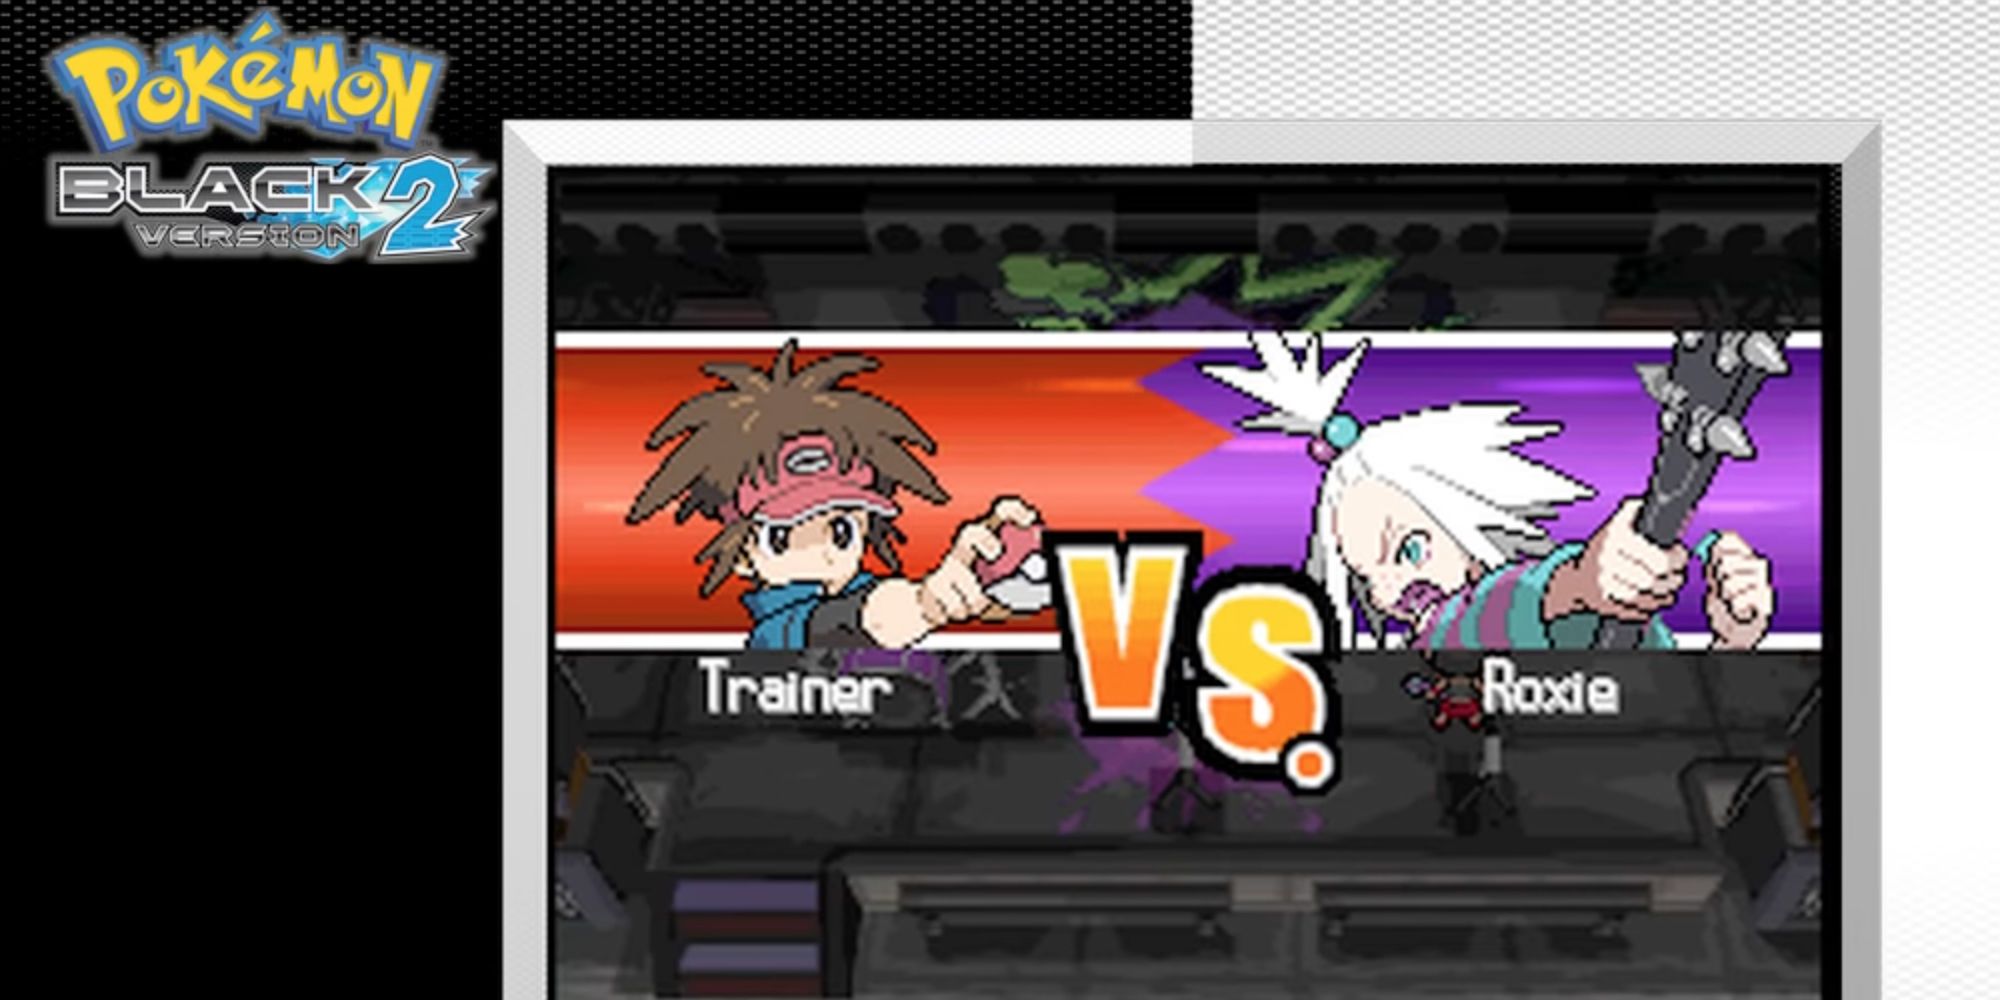 Trainer and Roxie from Pokemon Black Version 2 and Pokemon White Version 2